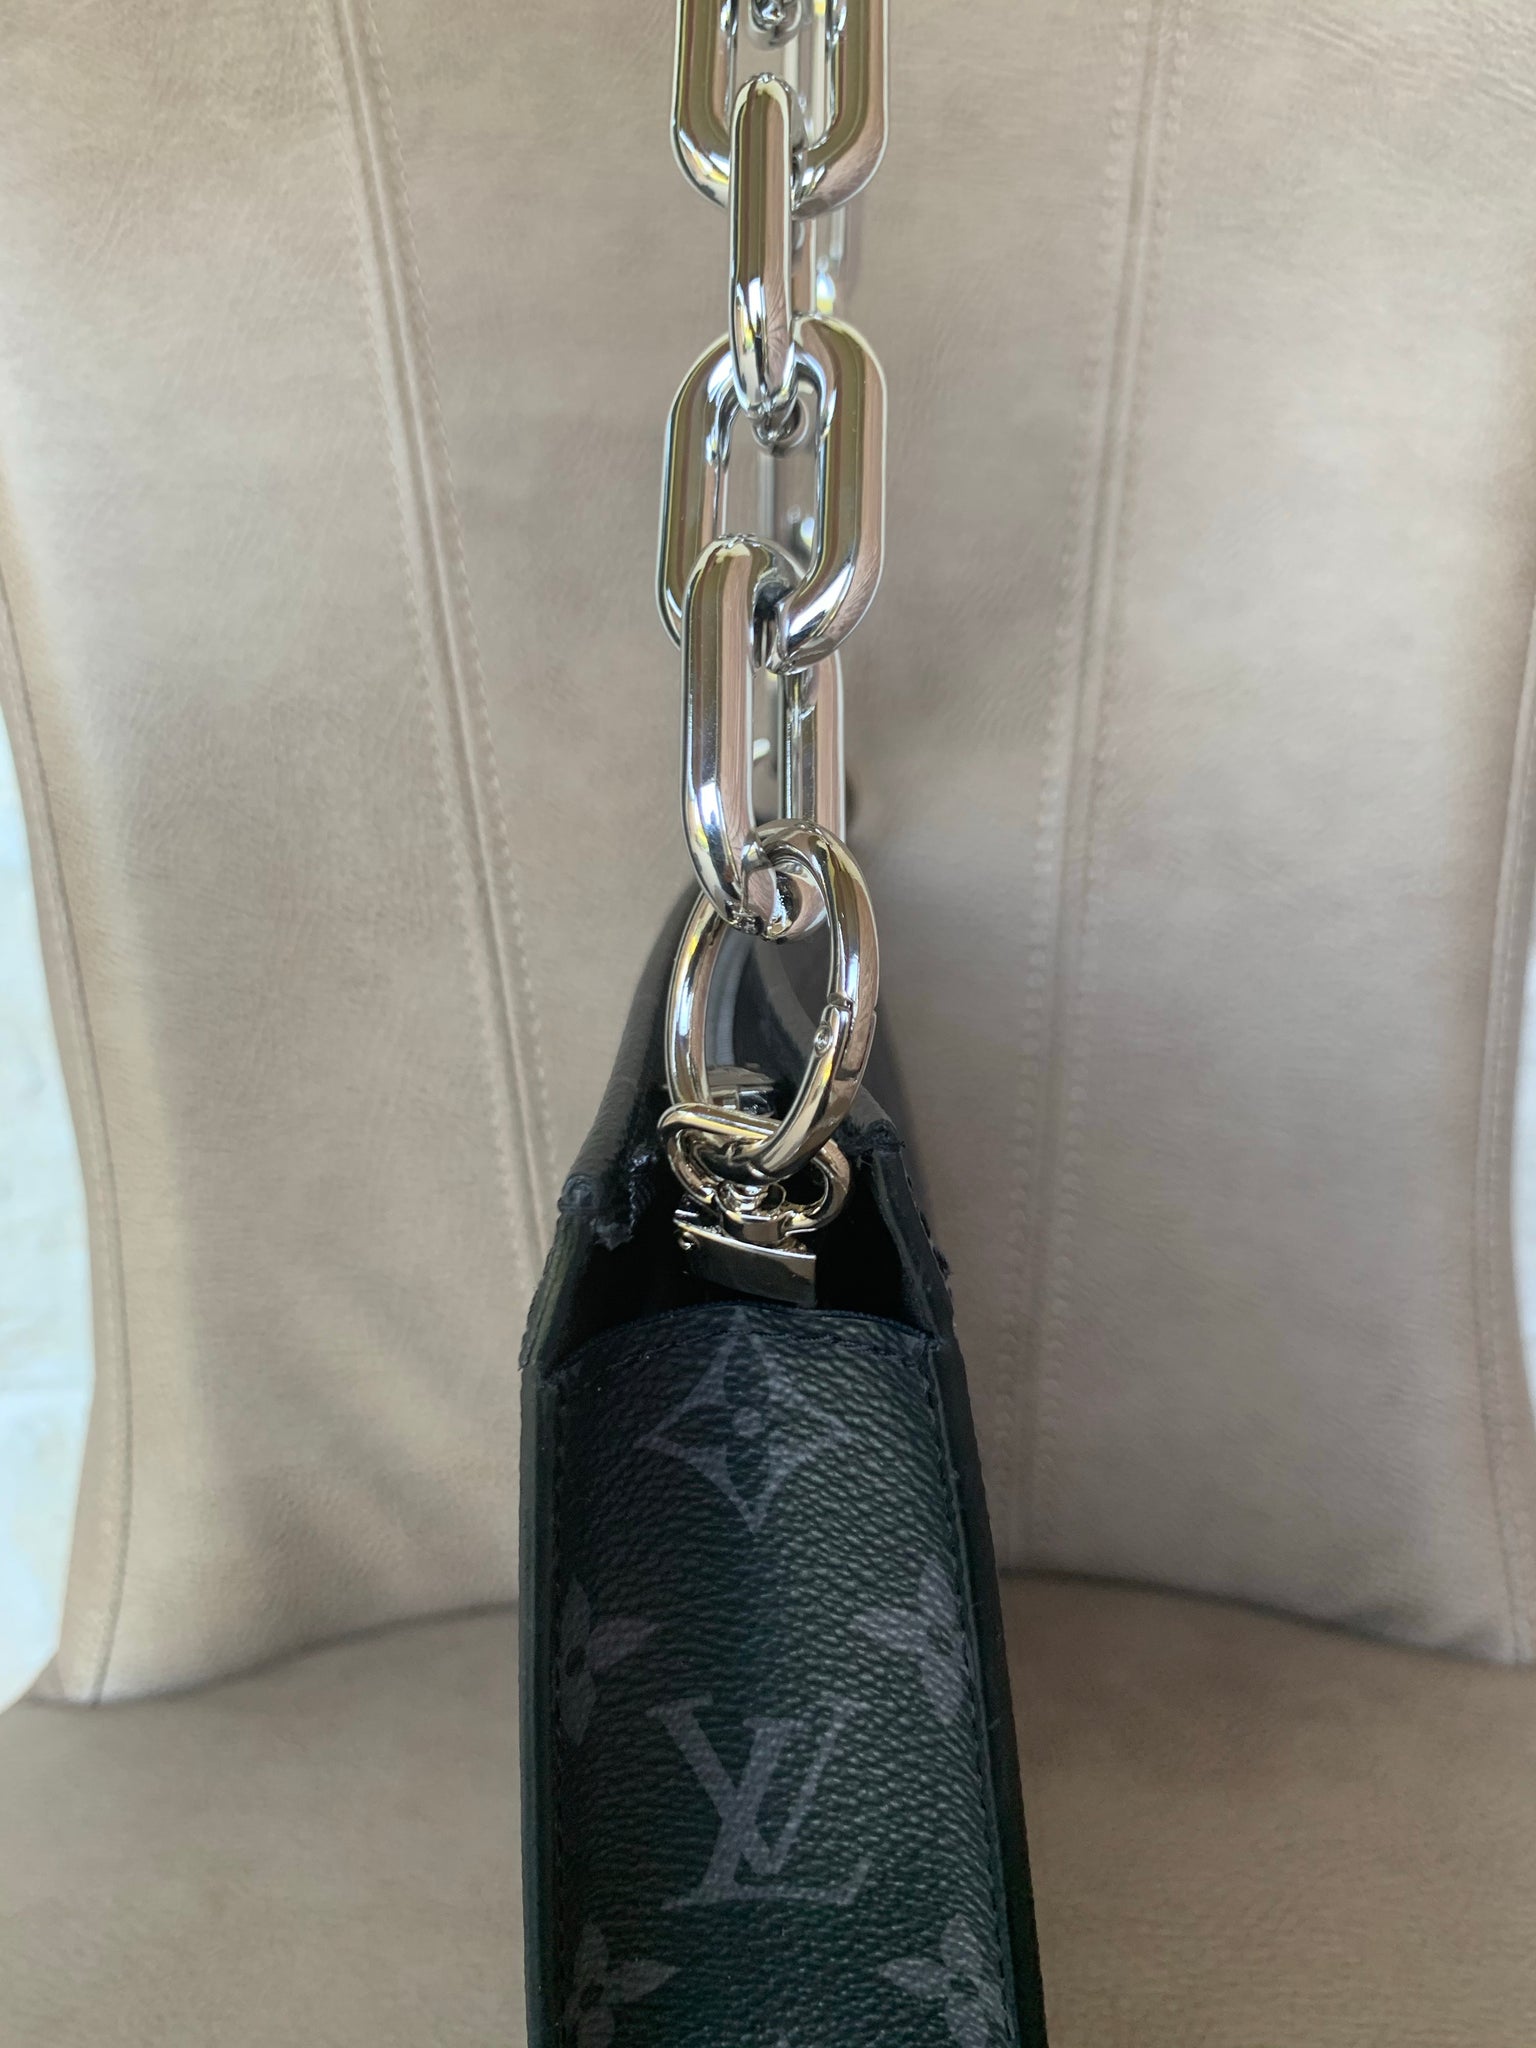 SILVER THICK PURSE CHAIN STRAP FOR LV TOILETRY 26 MAKE-UP POUCH